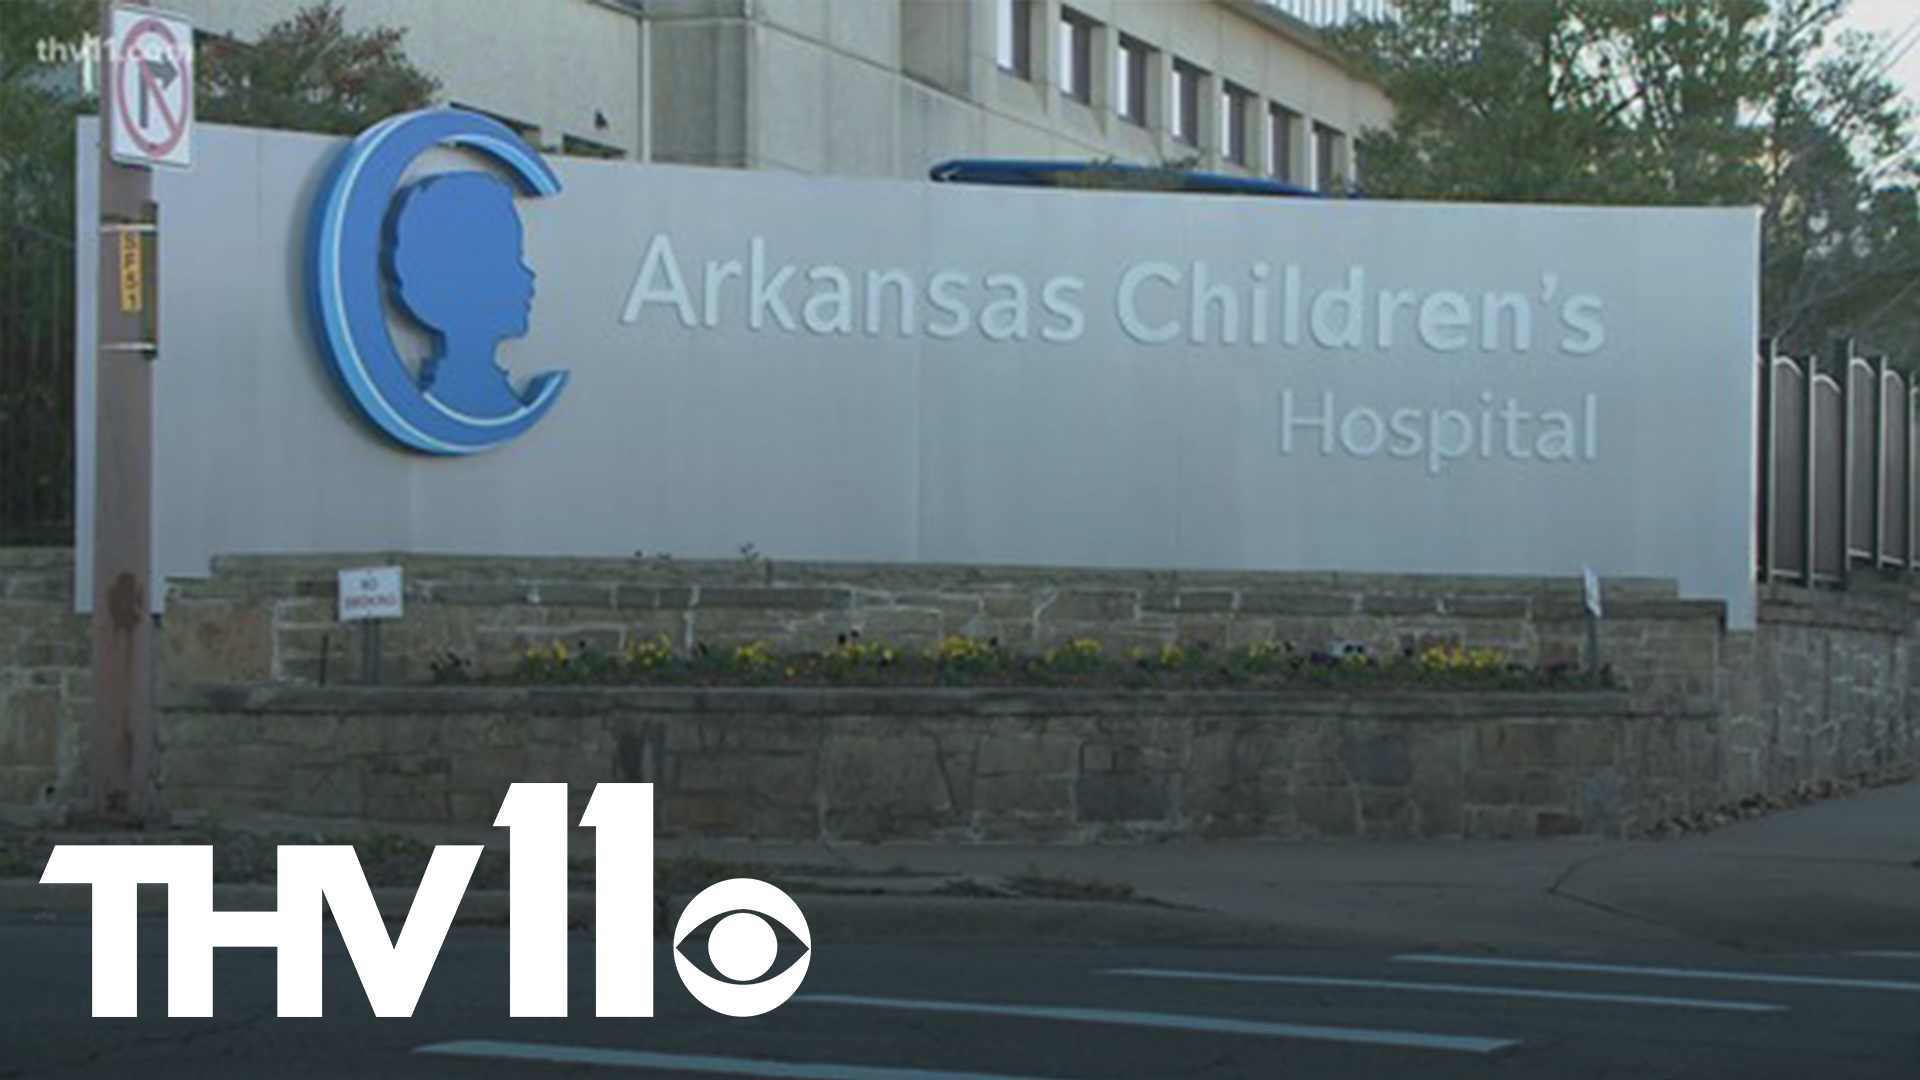 Several of our local organizations are heading down south to help with relief efforts. An Arkansas family is suing Arkansas Children's Hospital.